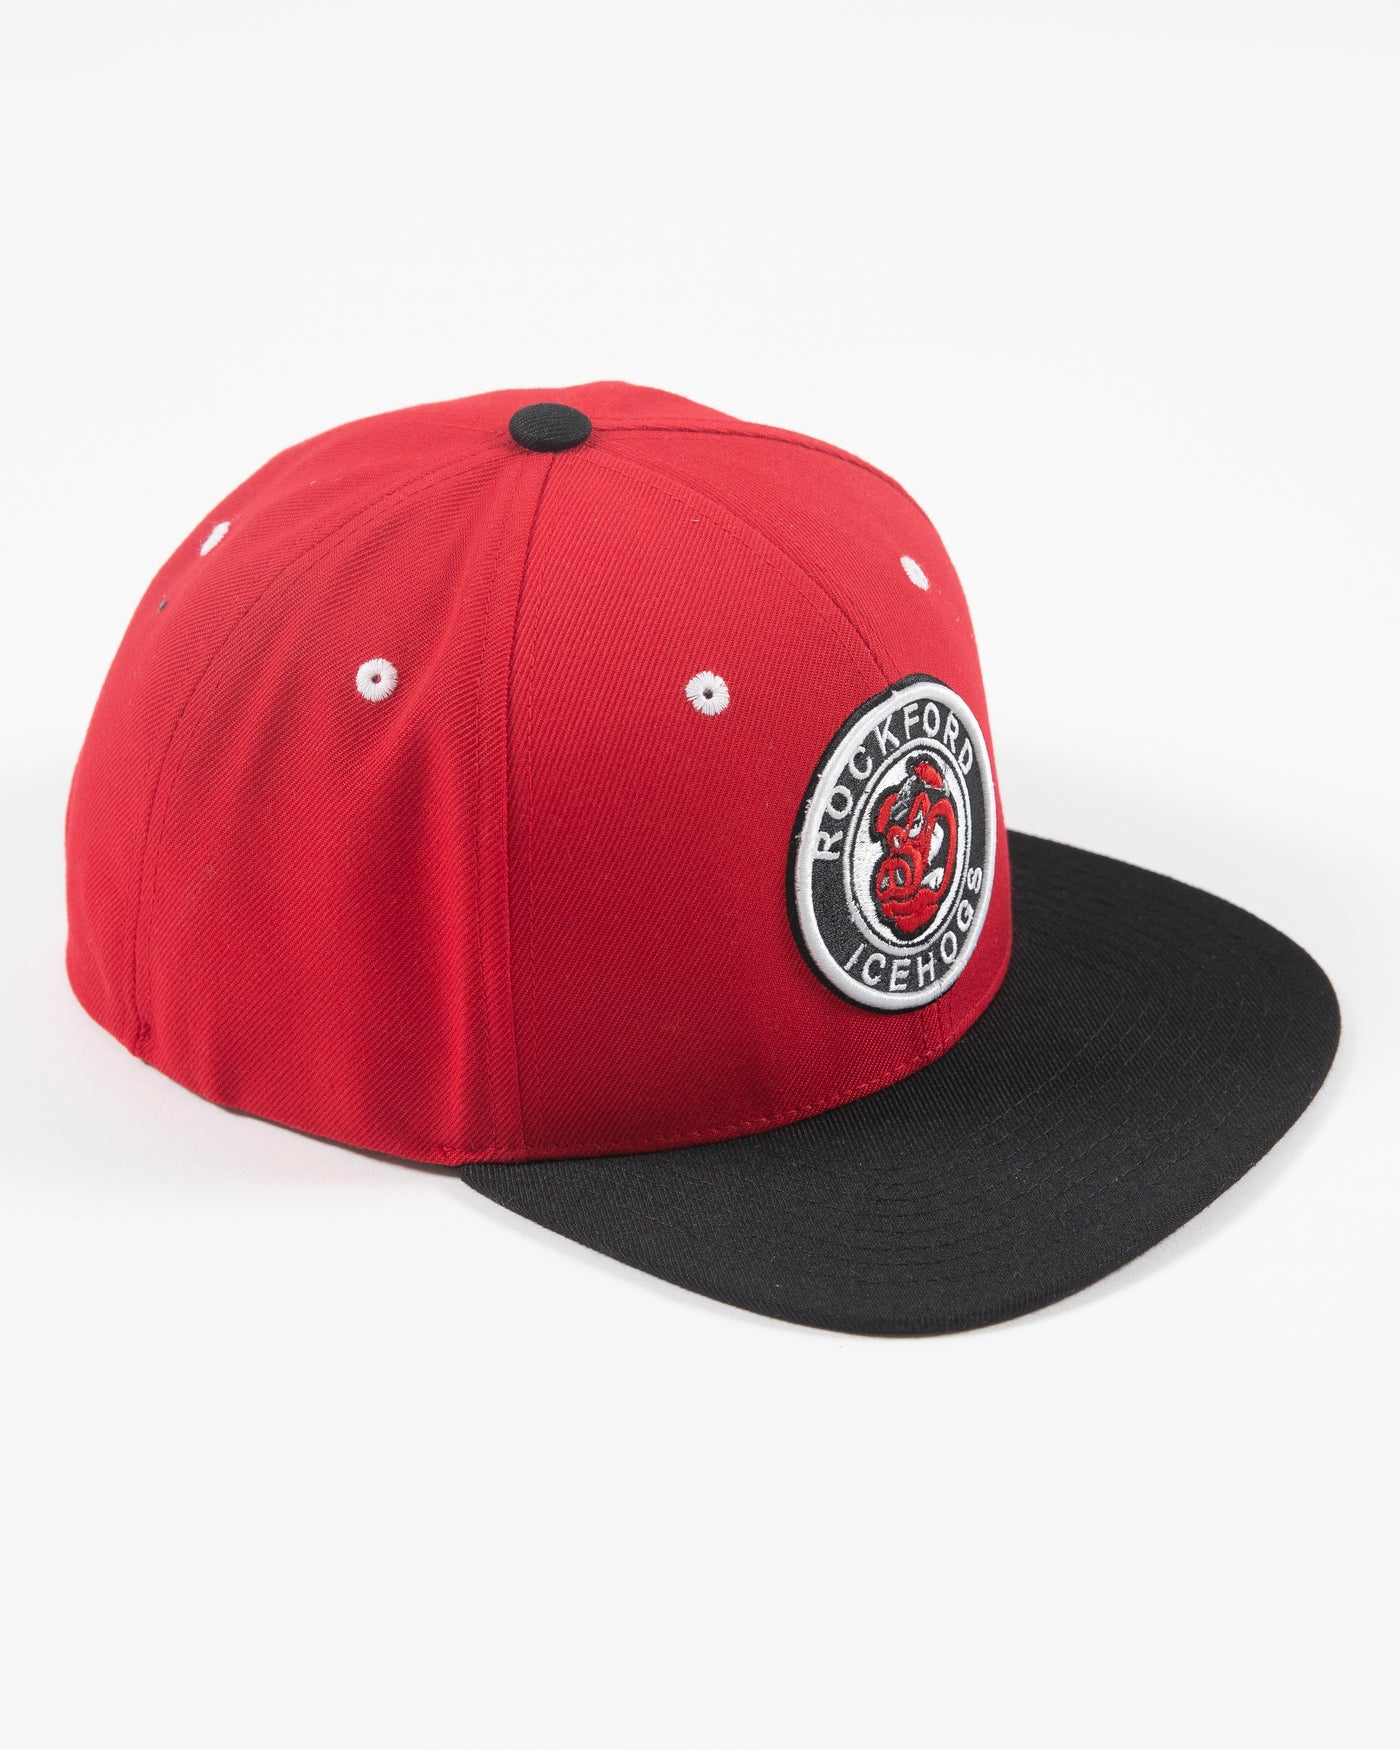 Black and red flat brim adjustable cap with Rockford IceHogs classic logo embroidered on front - right lay flat